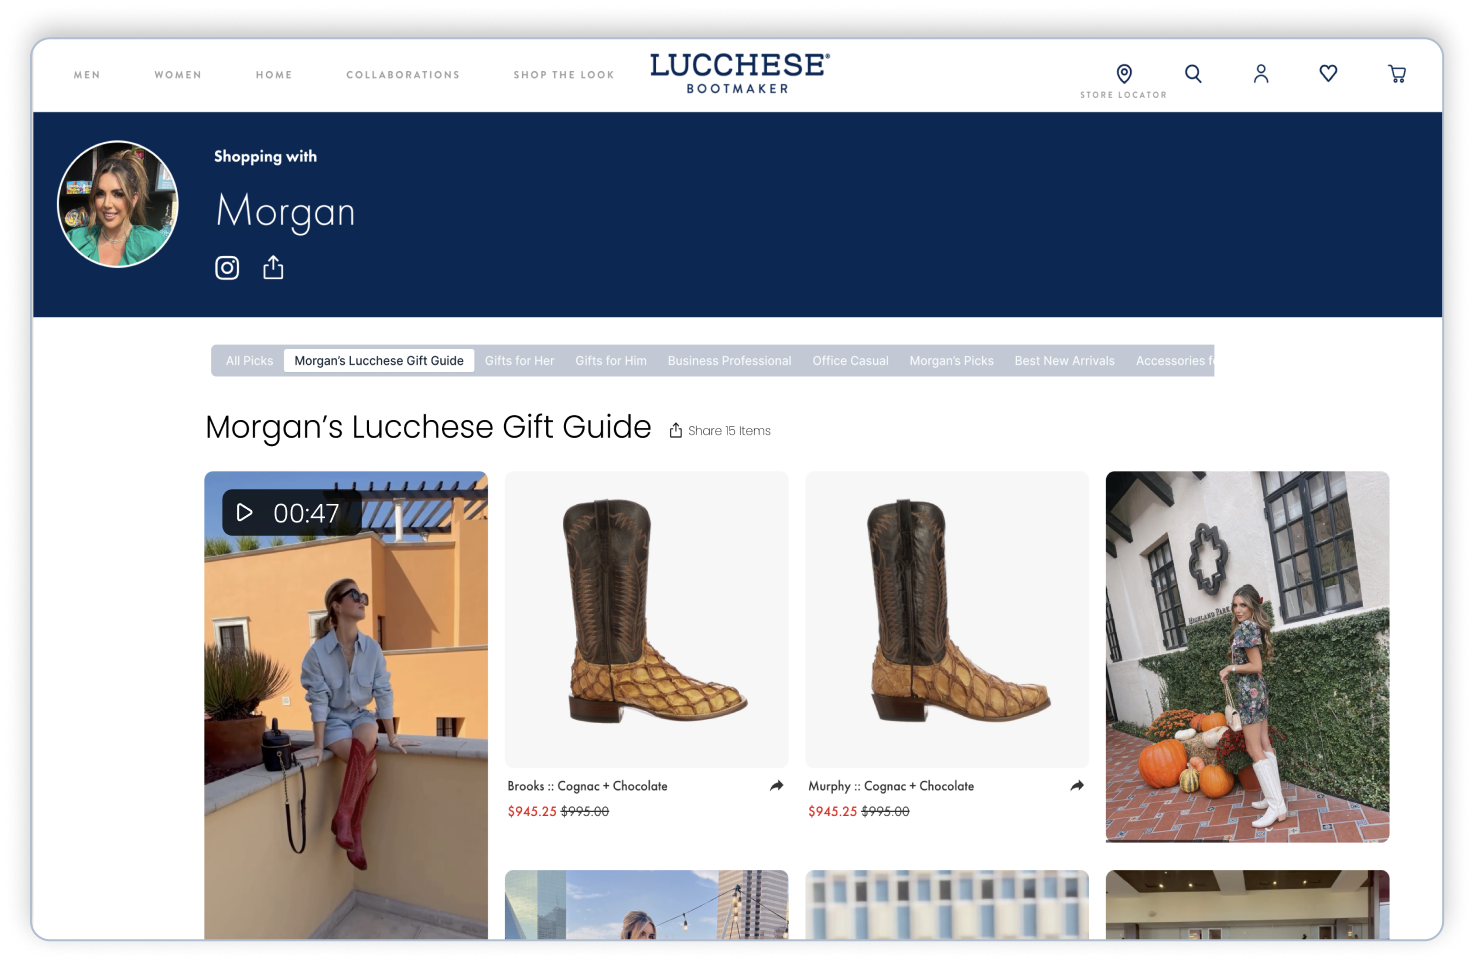 lucchese, morgan's performance influencer storefront